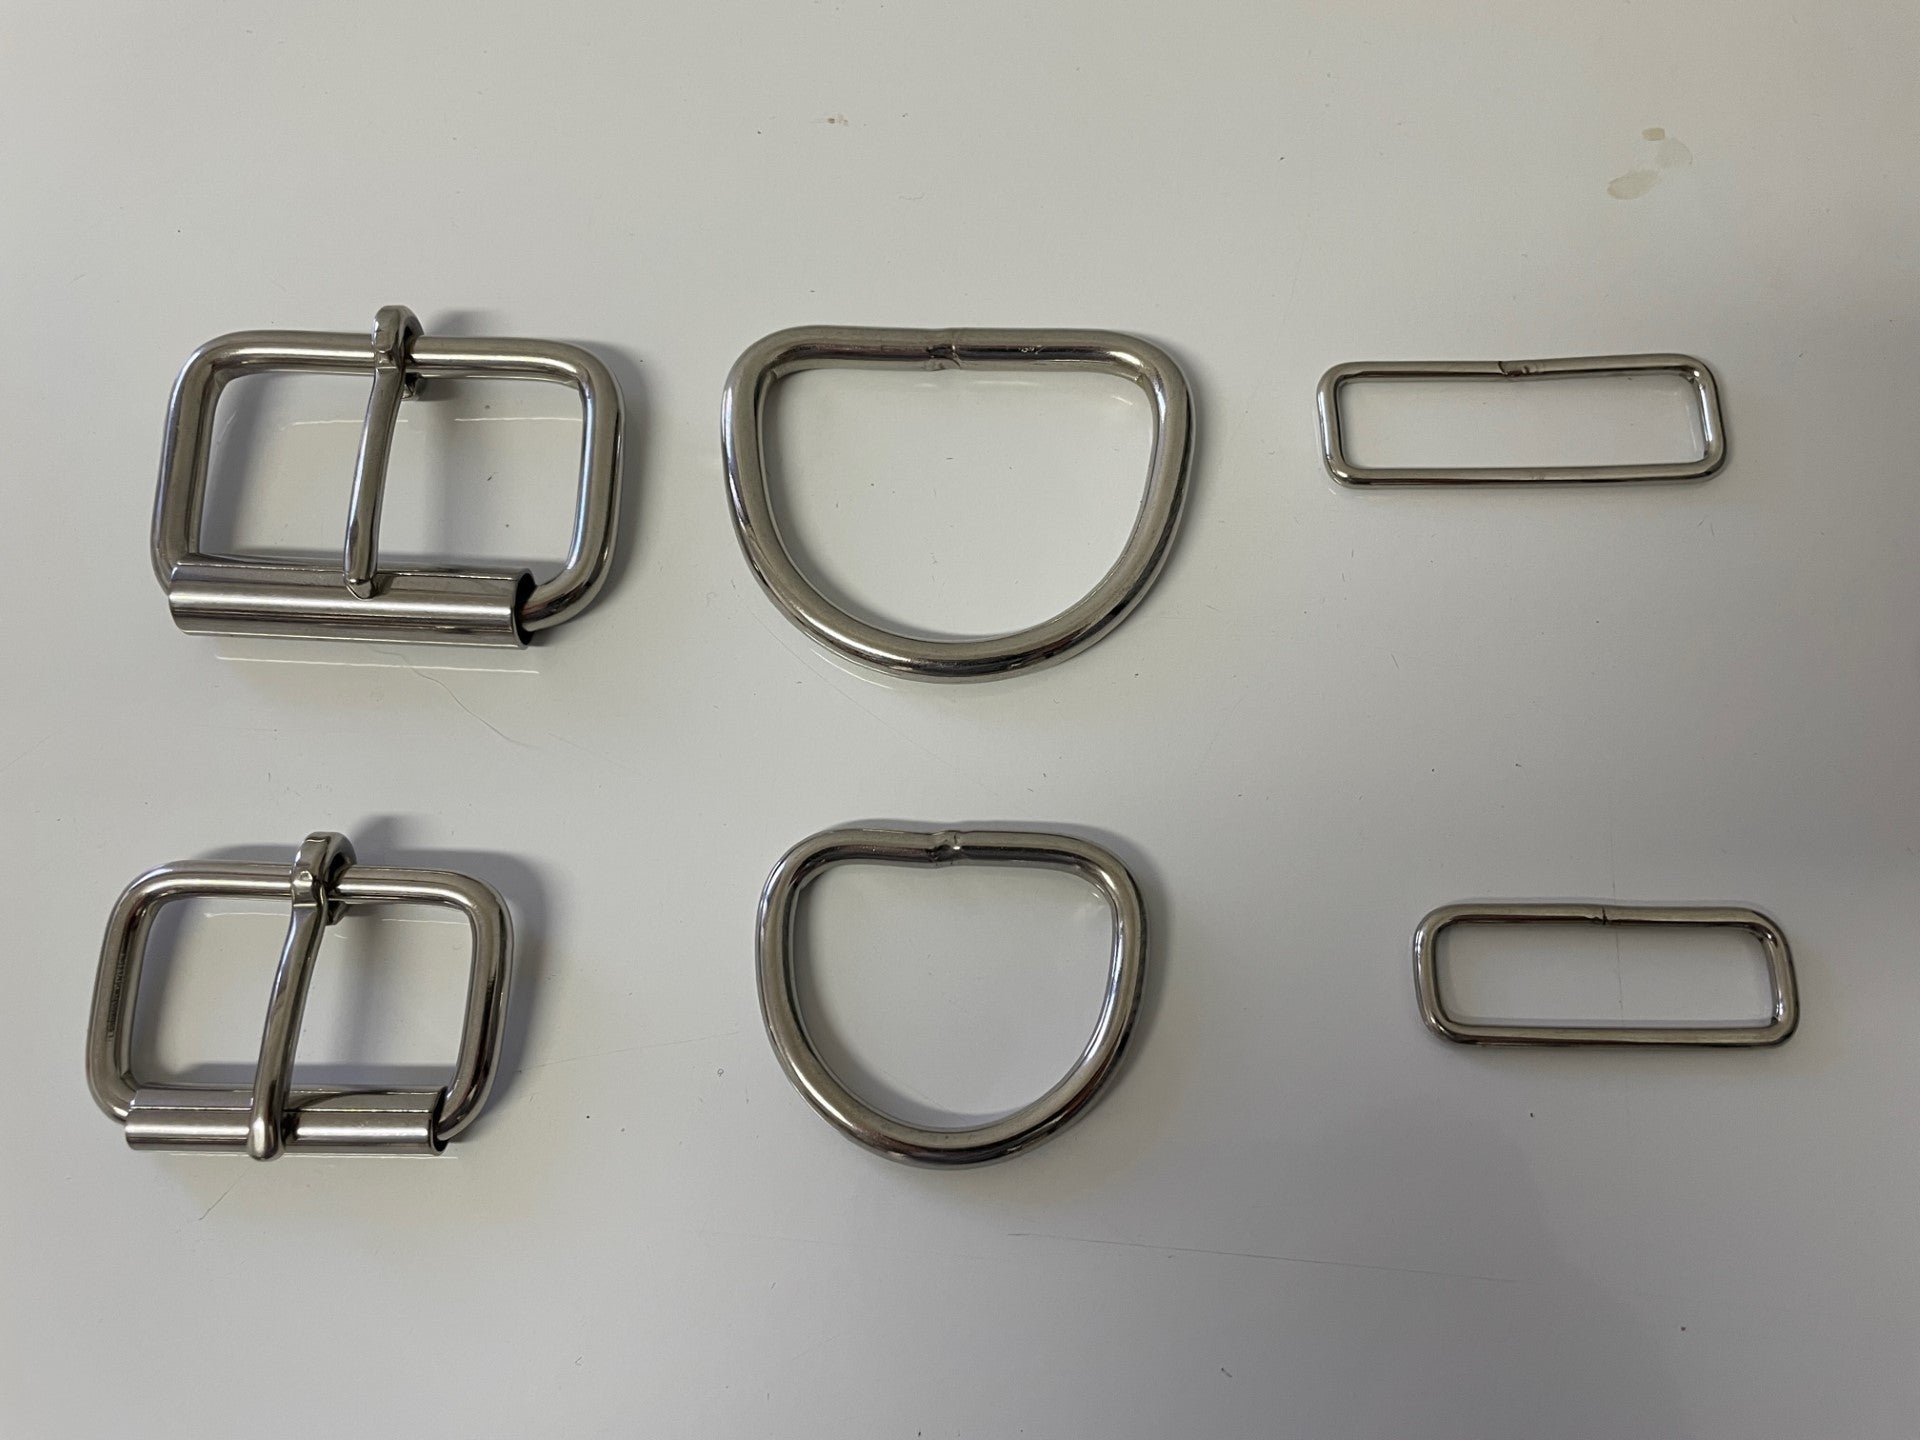 Stainless Steel Roller Buckle - 1&1/2"